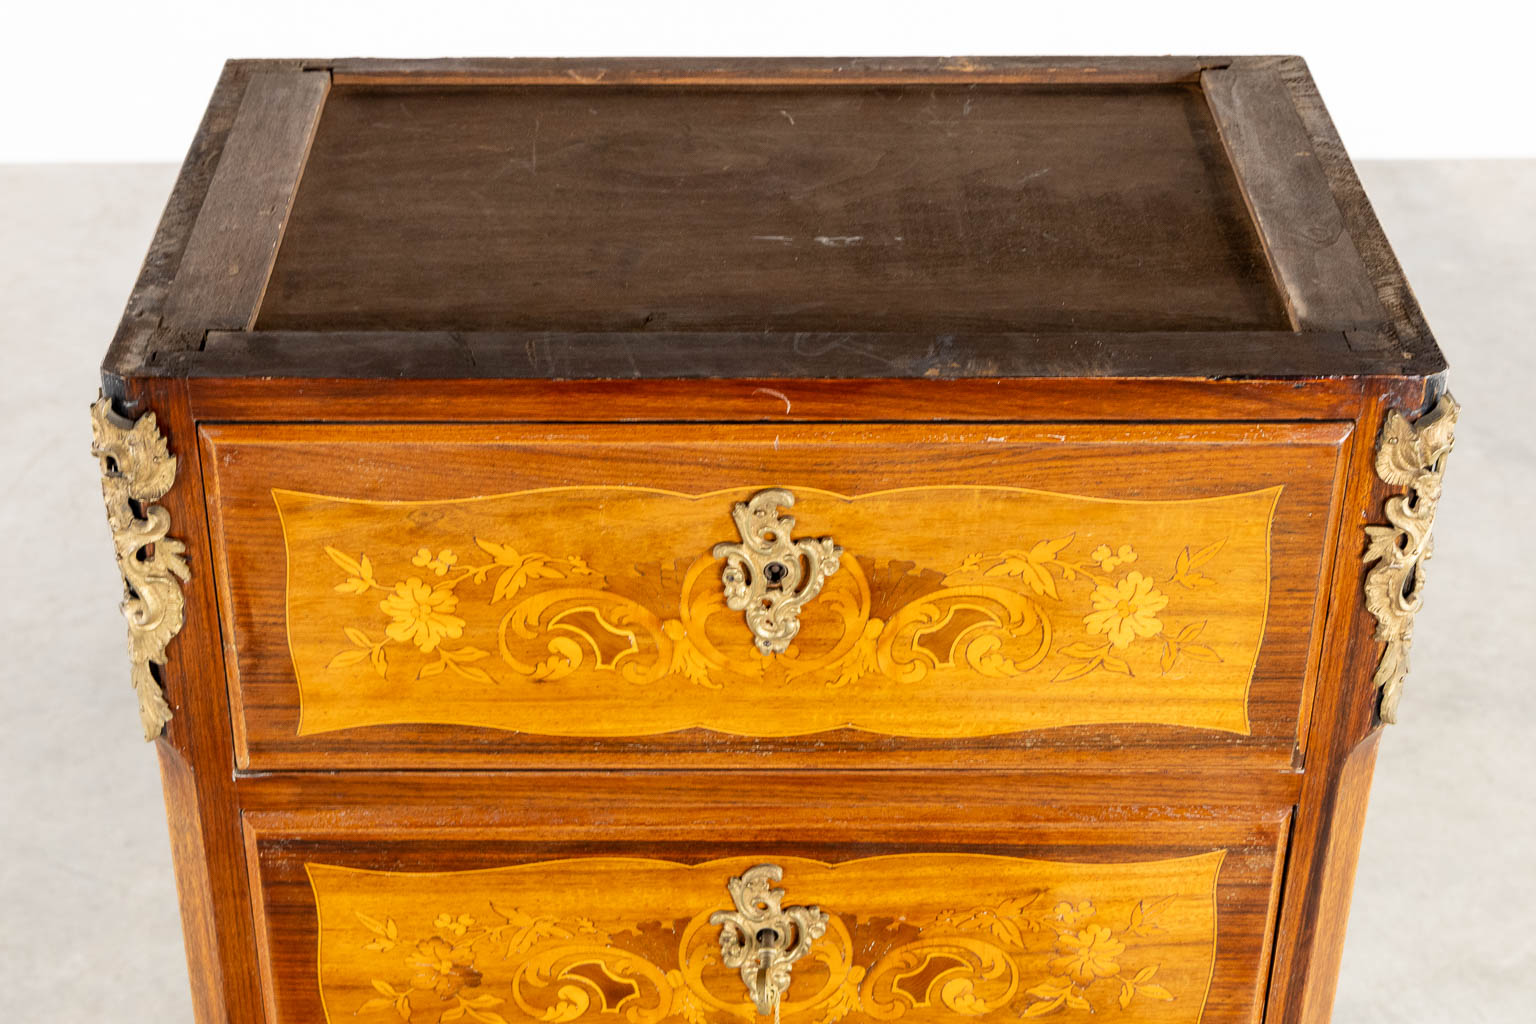 A Secretaire cabinet, Marquetry inlay and mounted with bronze. Circa 1900. (L:34 x W:56 x H:128 cm) - Image 10 of 15